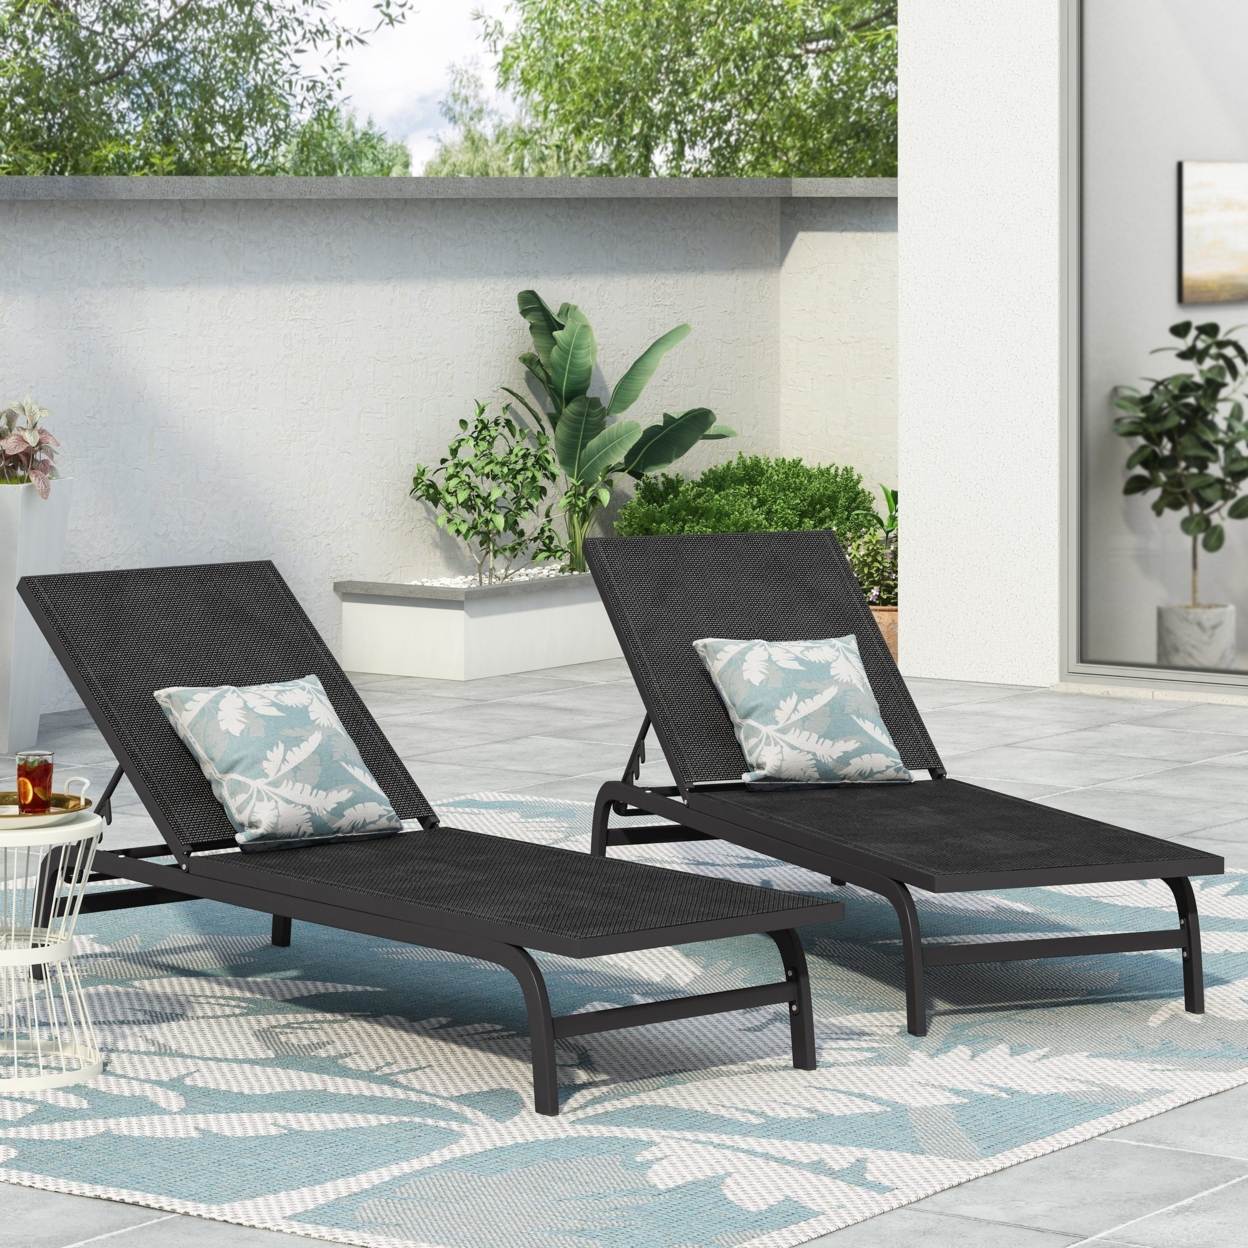 Stekar Outdoor Aluminum And Outdoor Mesh Chaise Lounge, Set Of 2 - White